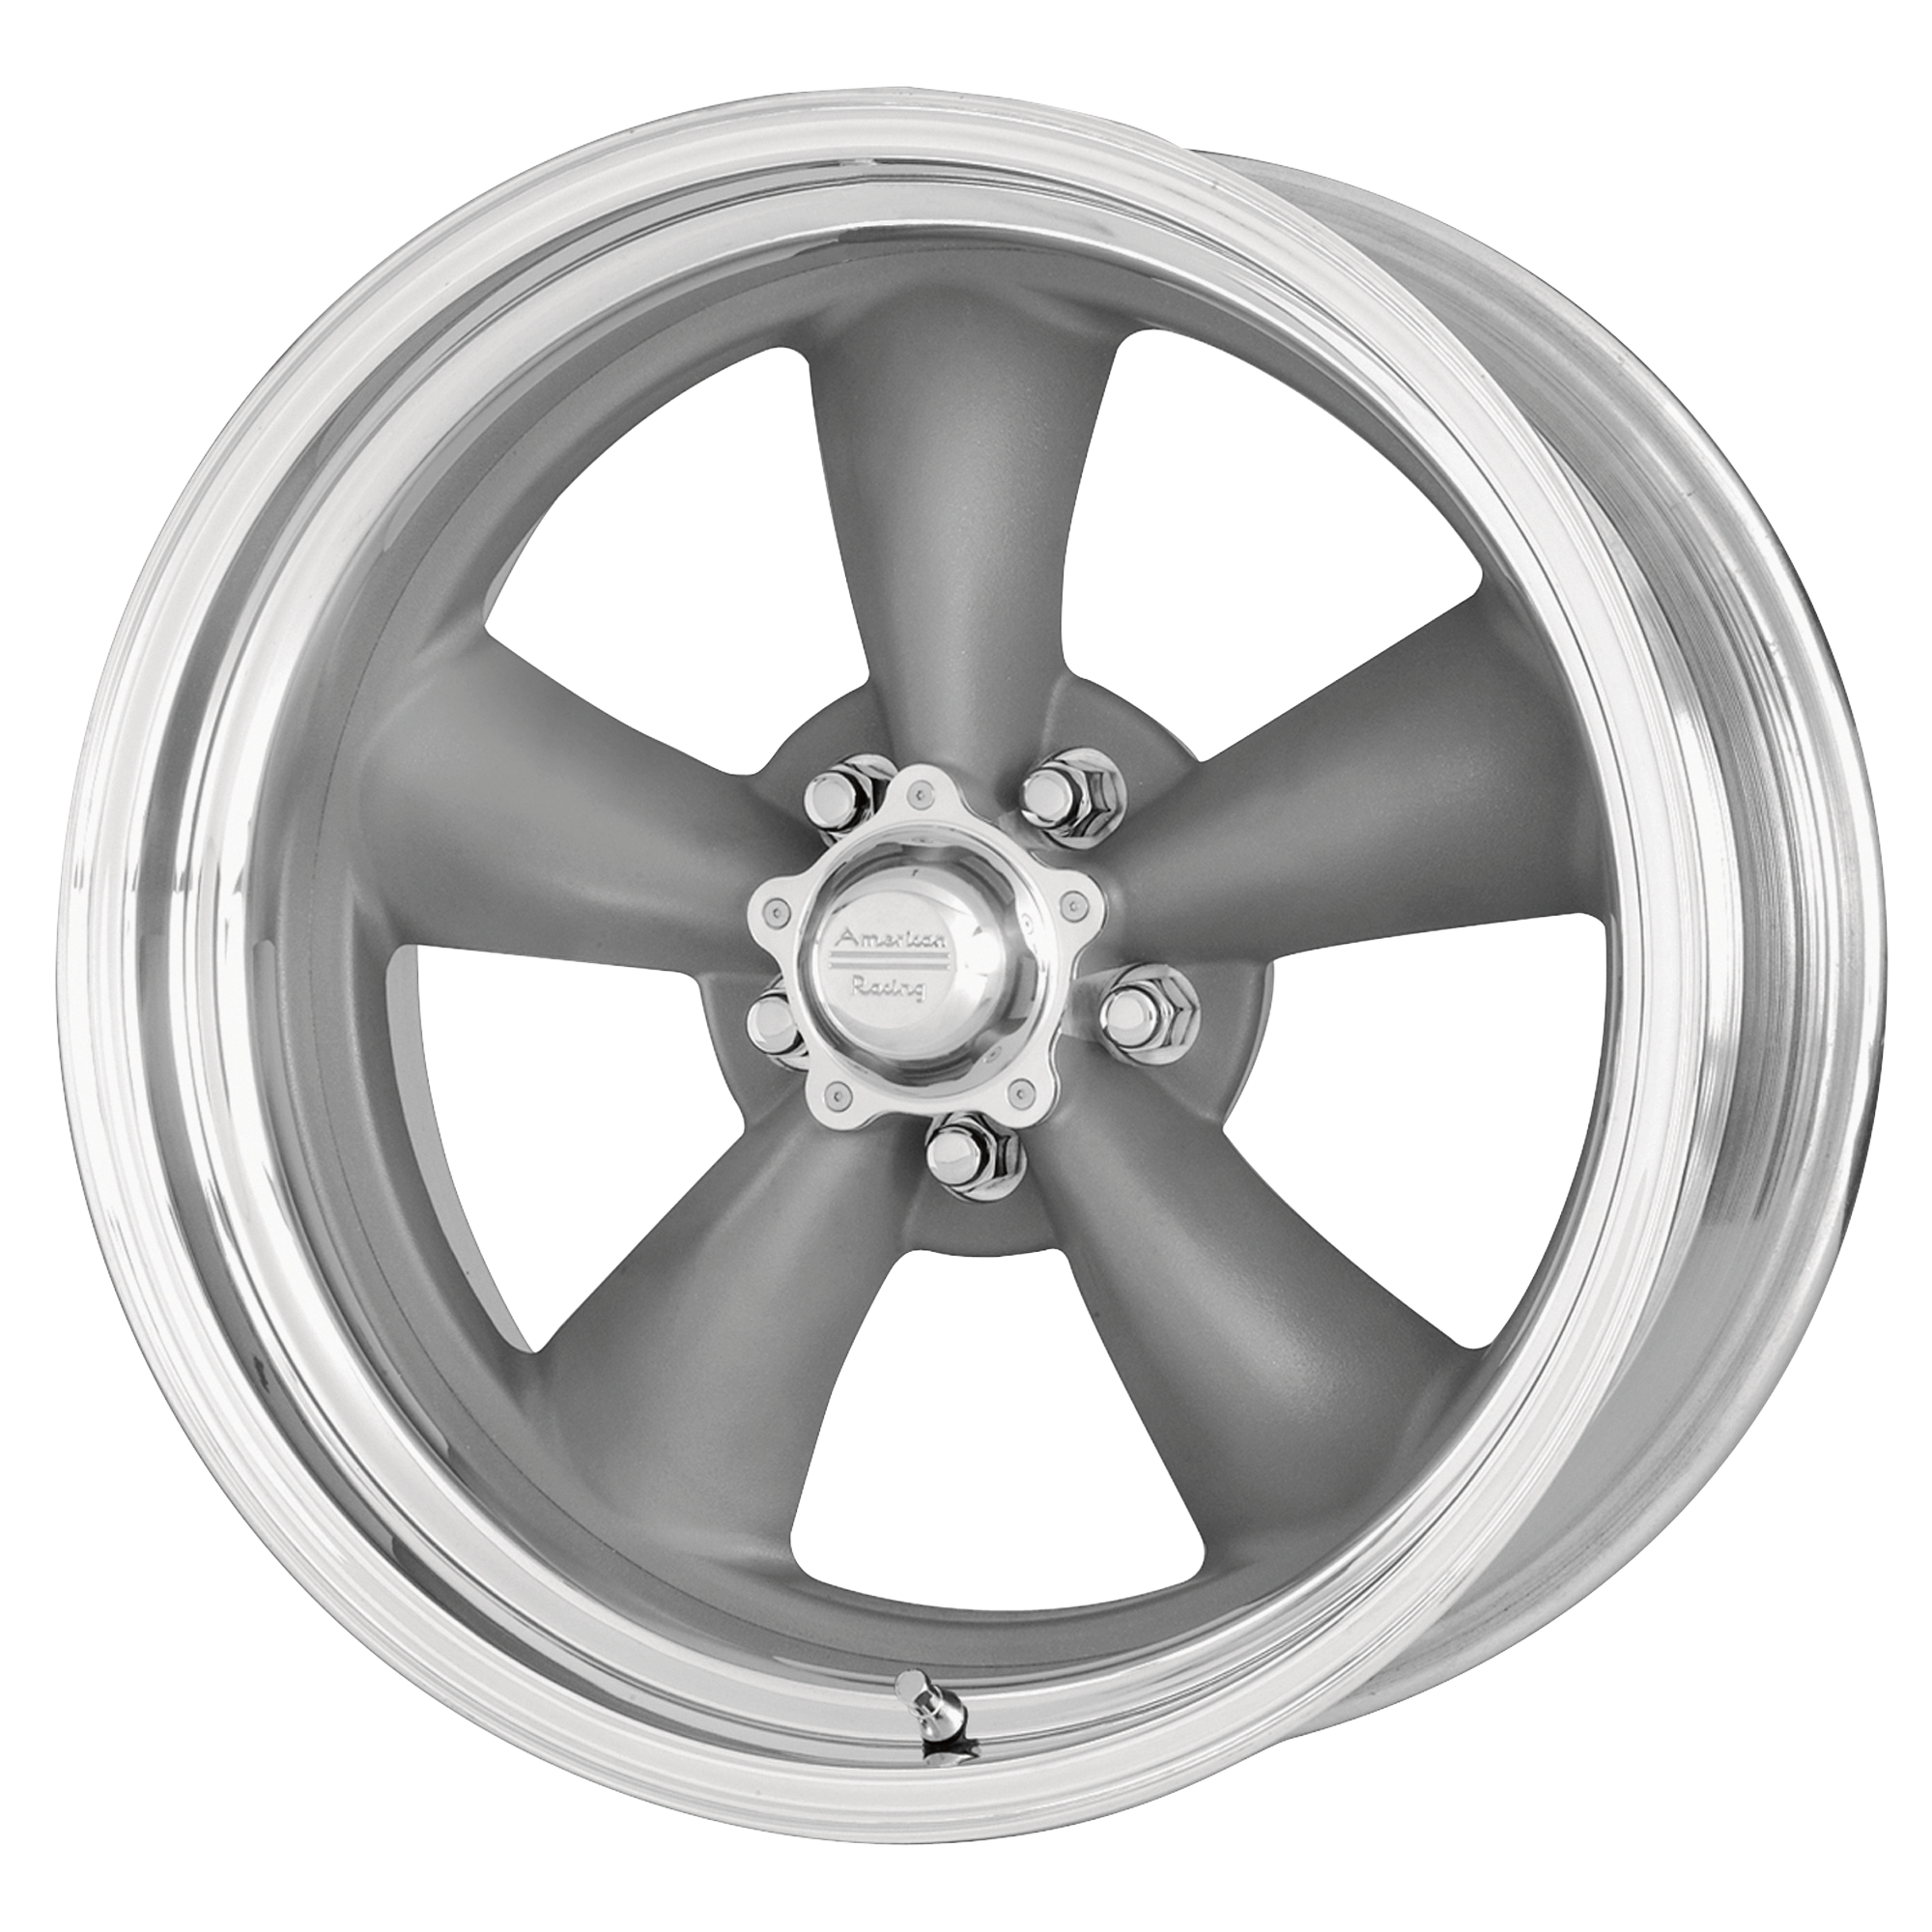 CLASSIC TORQ THRUST II ONE PIECE 17x8 5x114.30 MAG GRAY W/ MACHINED LIP (-11 mm) - Tires and Engine Performance